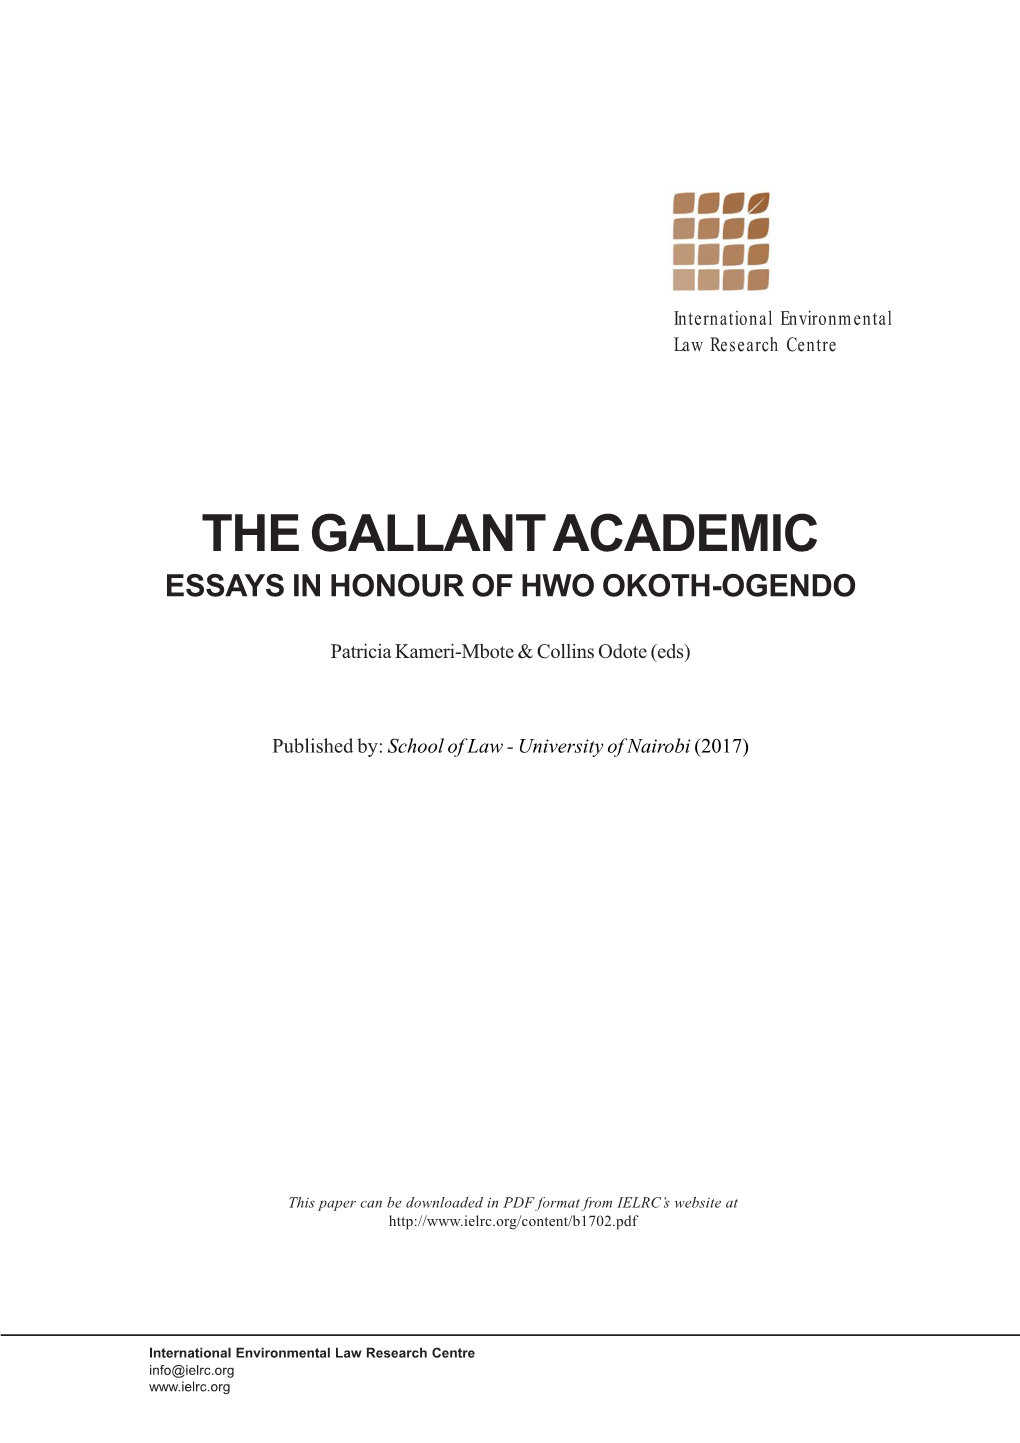 The Gallant Academic Essays in Honour of Hwo Okoth-Ogendo